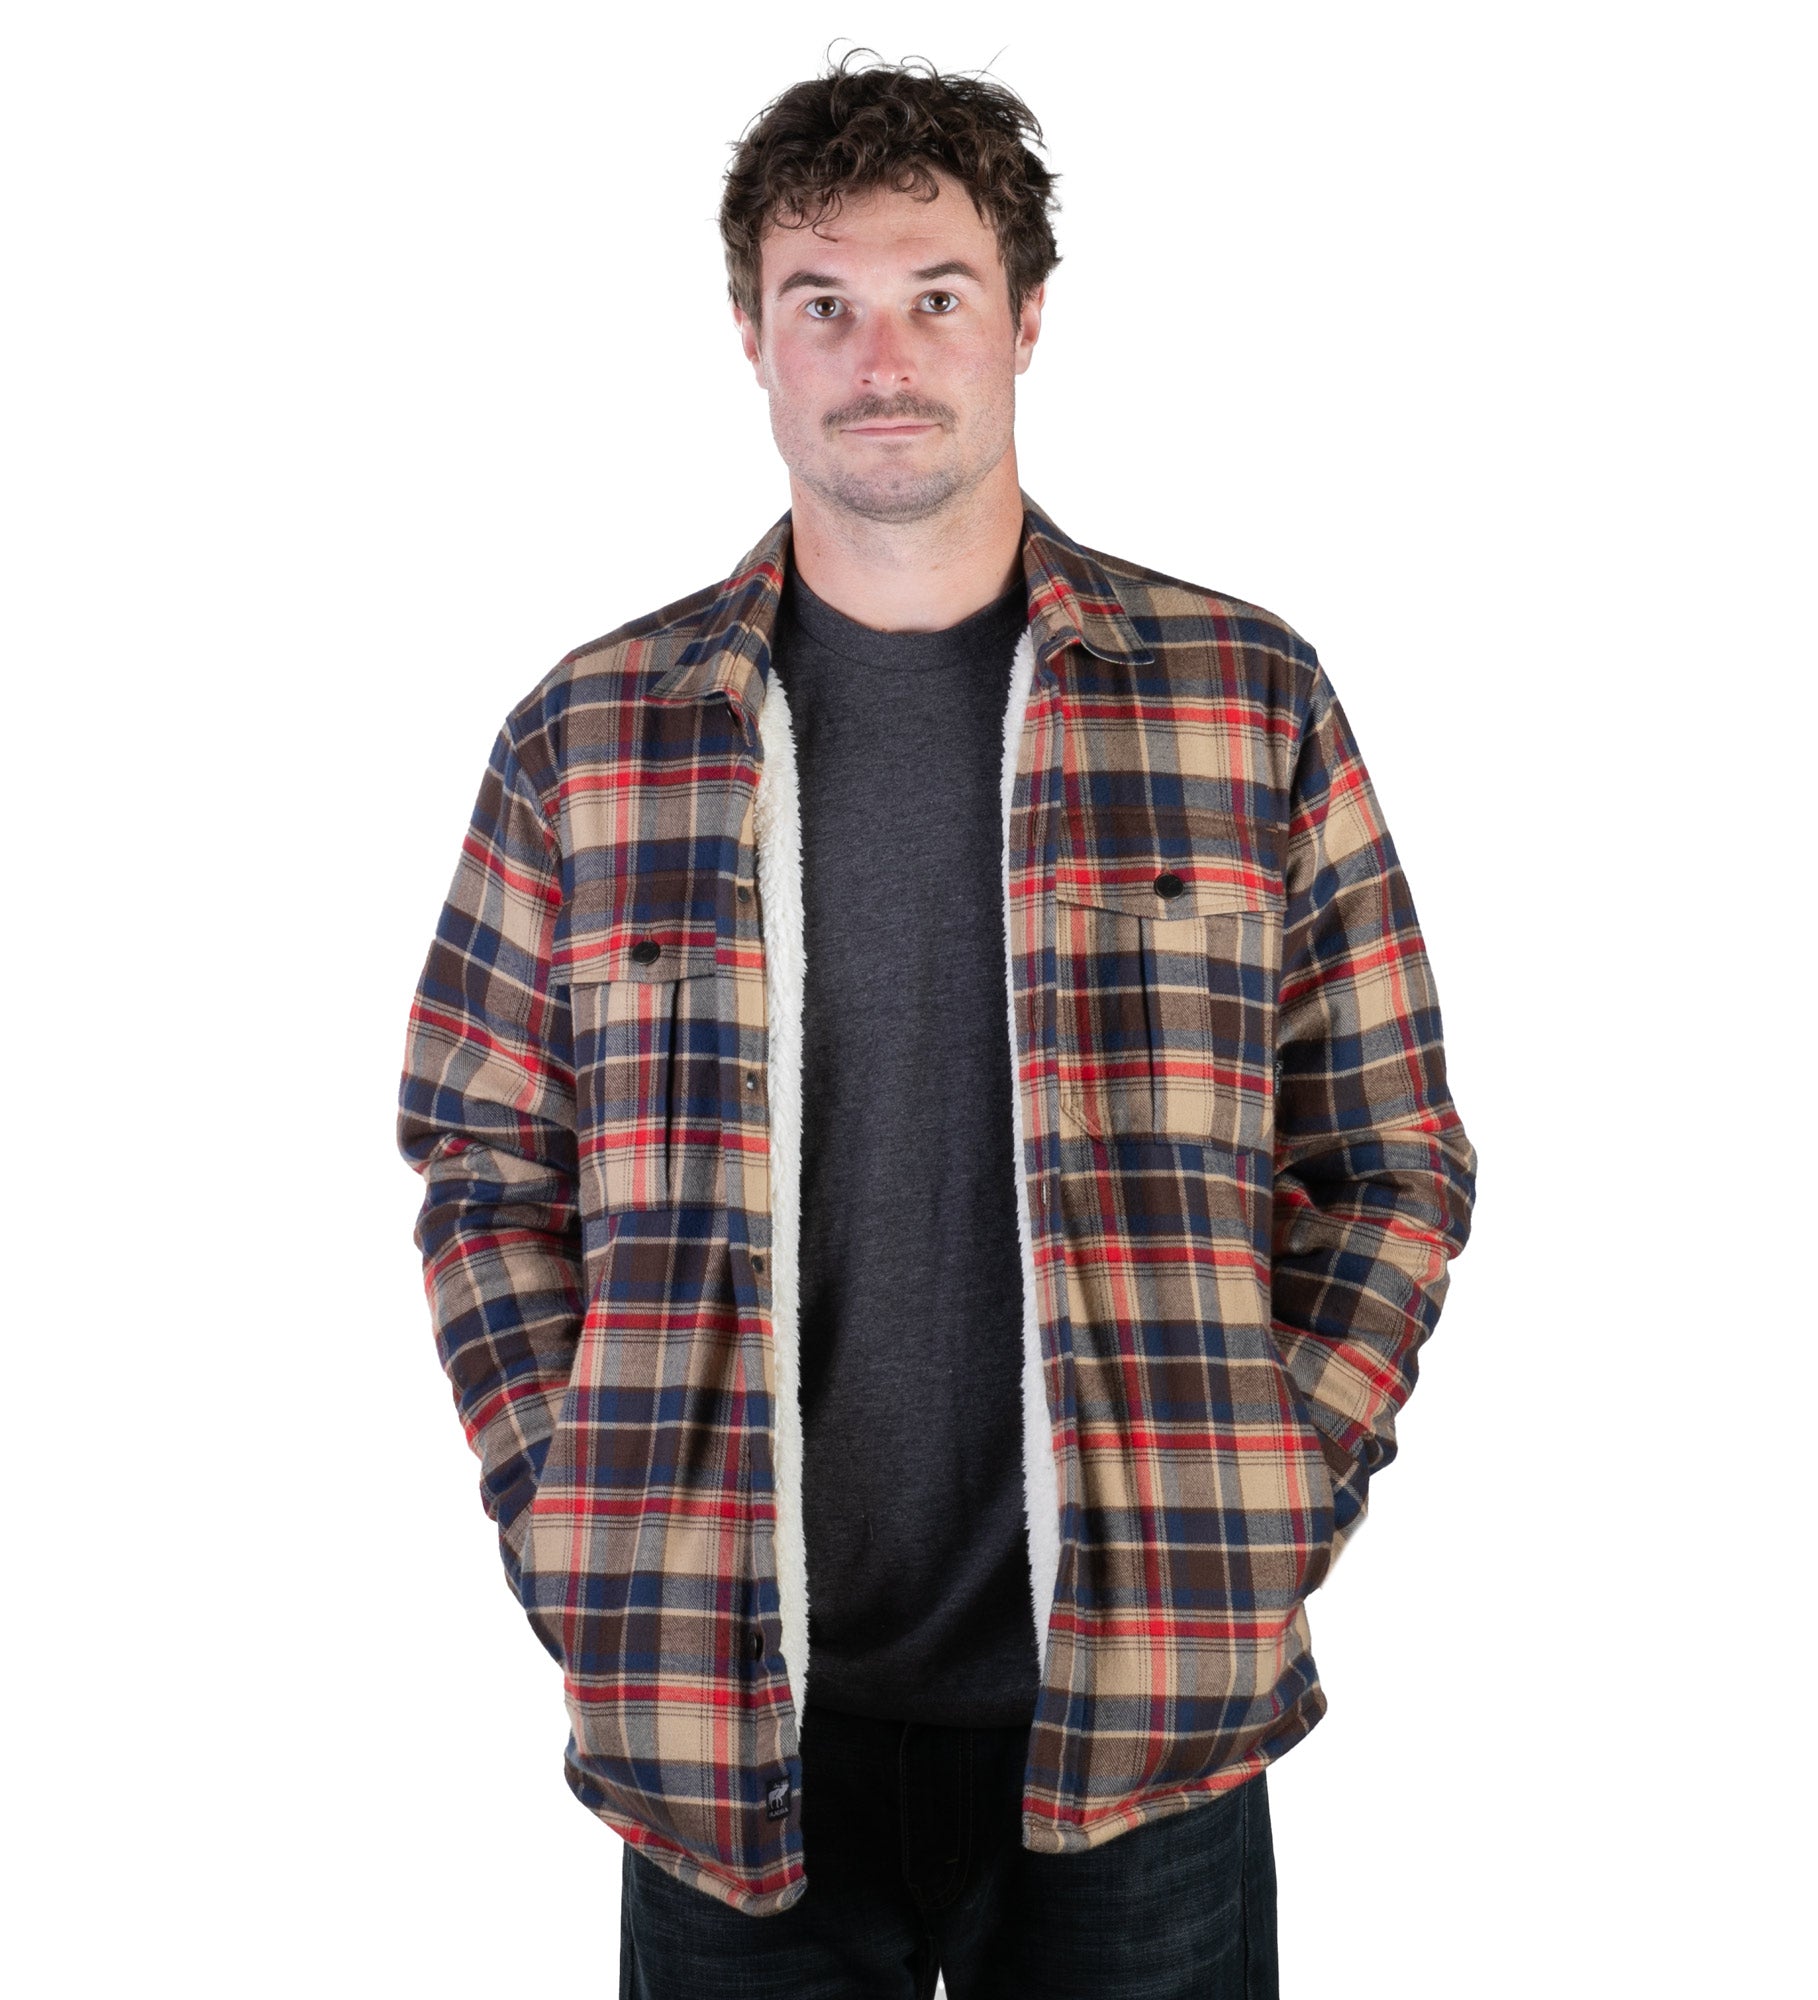 Men's THERMAL LINED Brushed Plaid FLANNEL SHIRT JACKET Insulated Body &  Sleeves